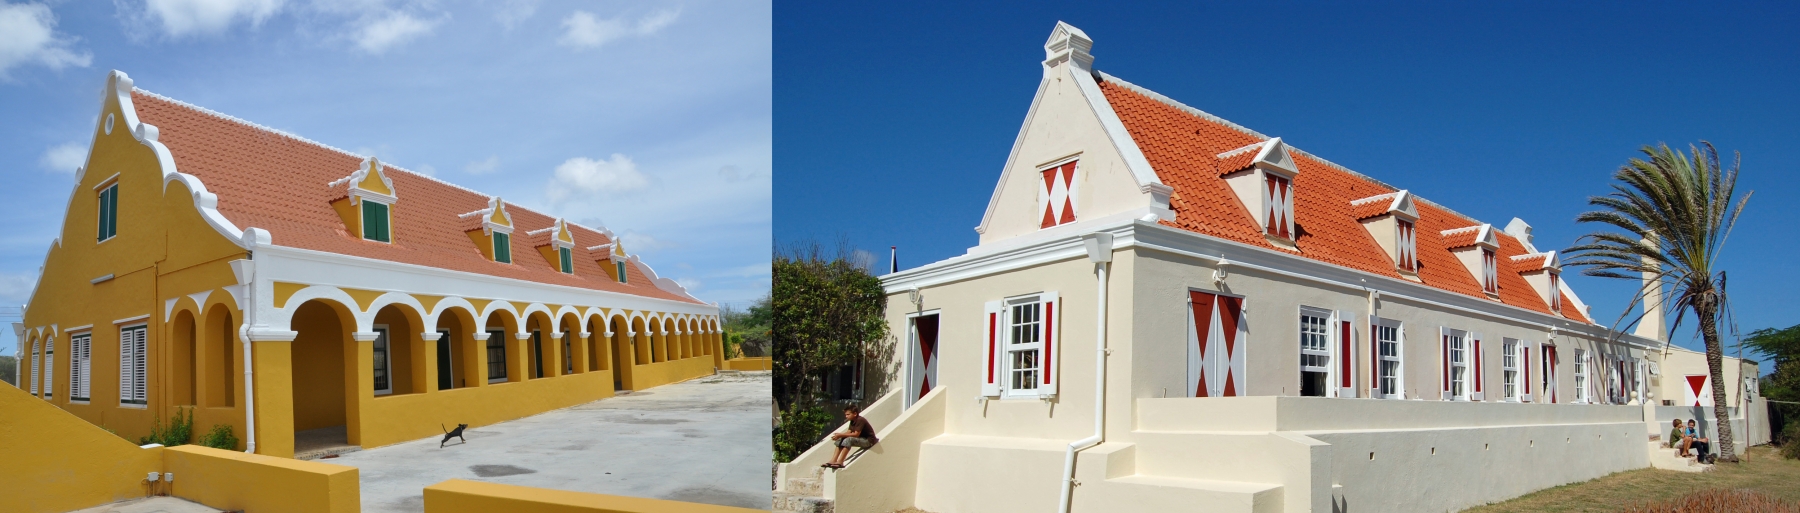 Photos of landhouses in Curacao